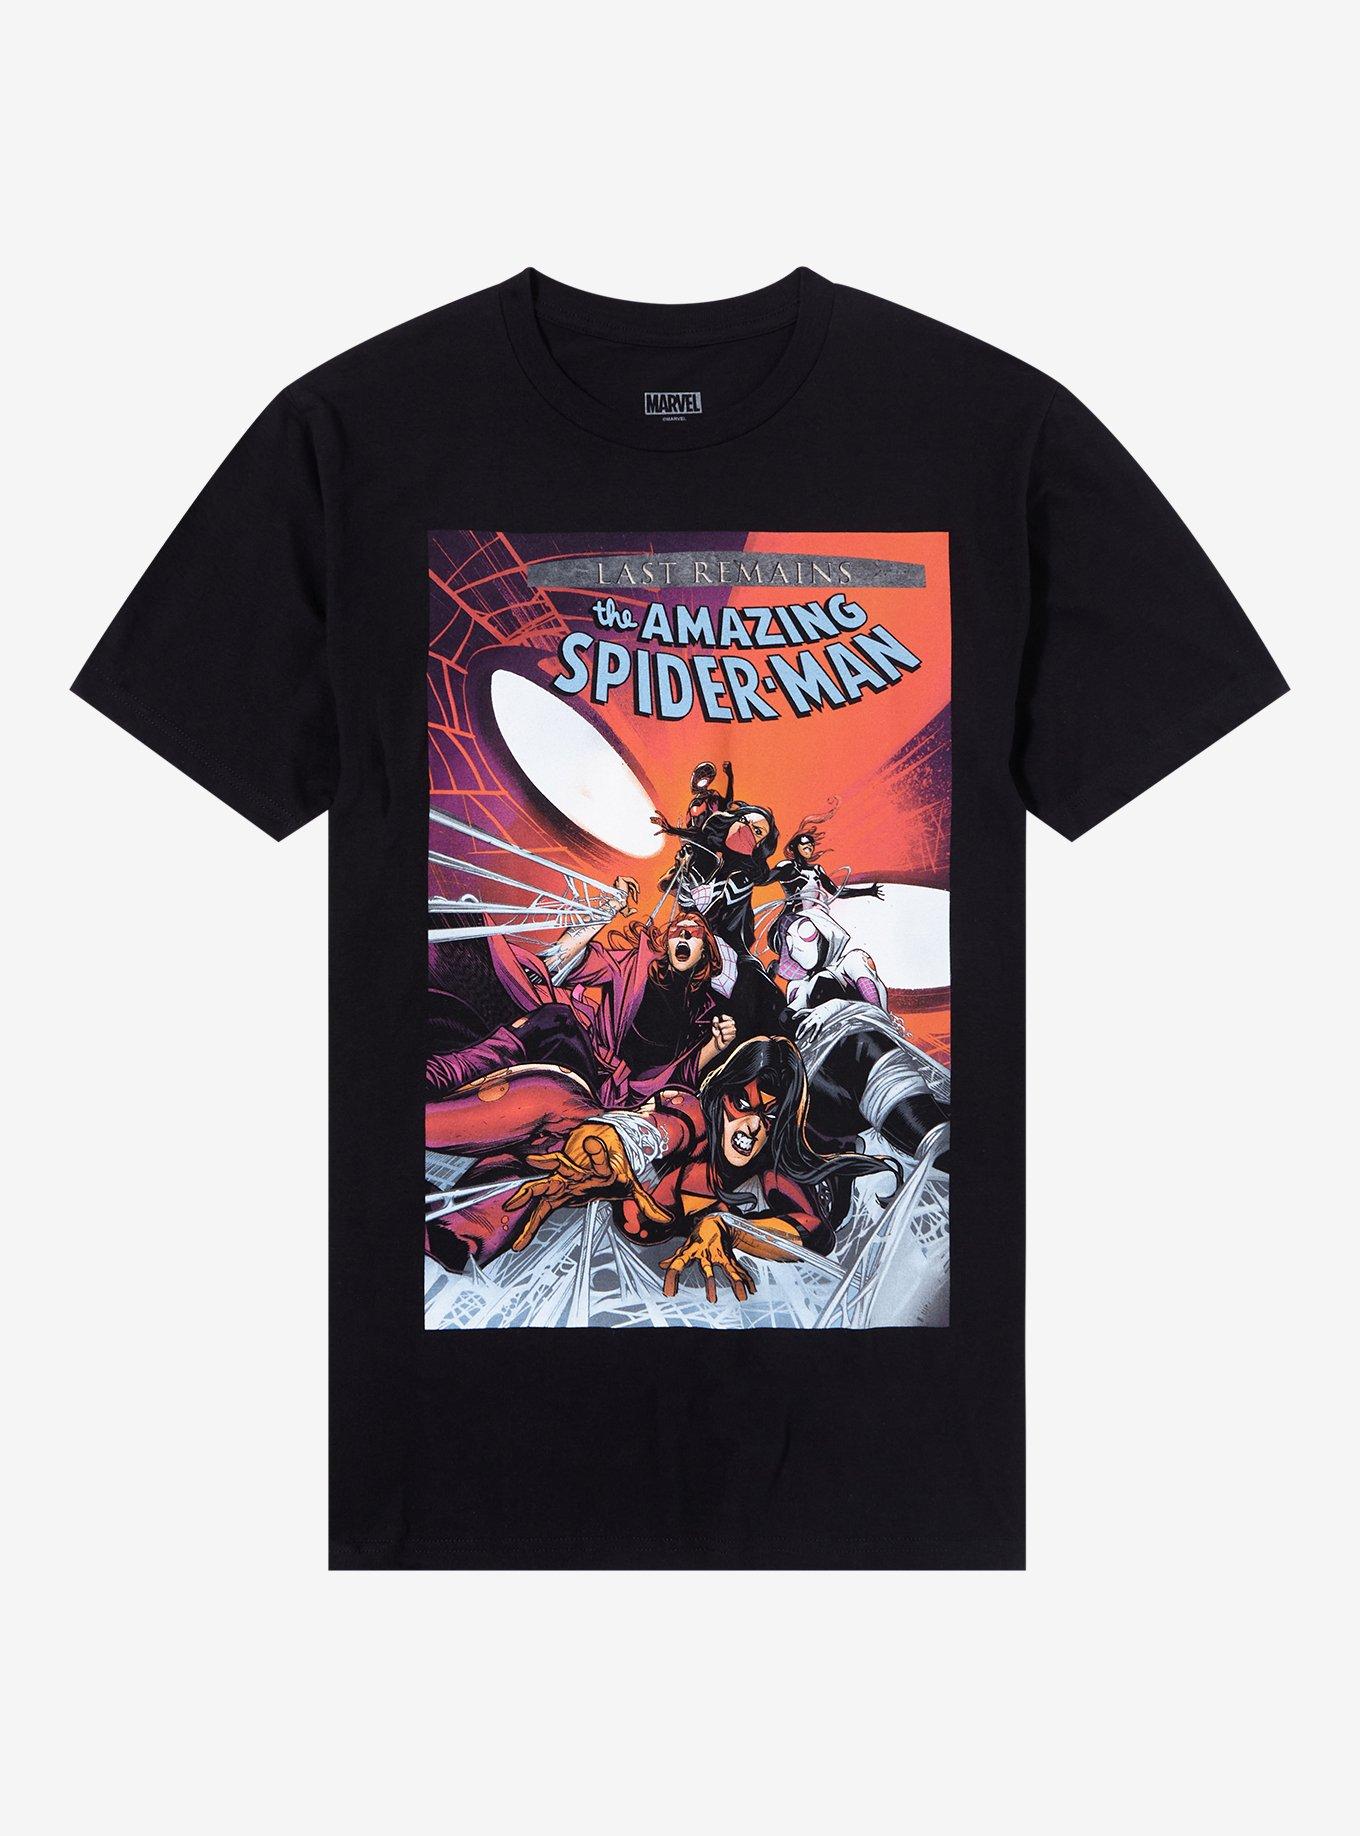 Marvel The Amazing Spider-Man Last Remains Comic Cover T-Shirt